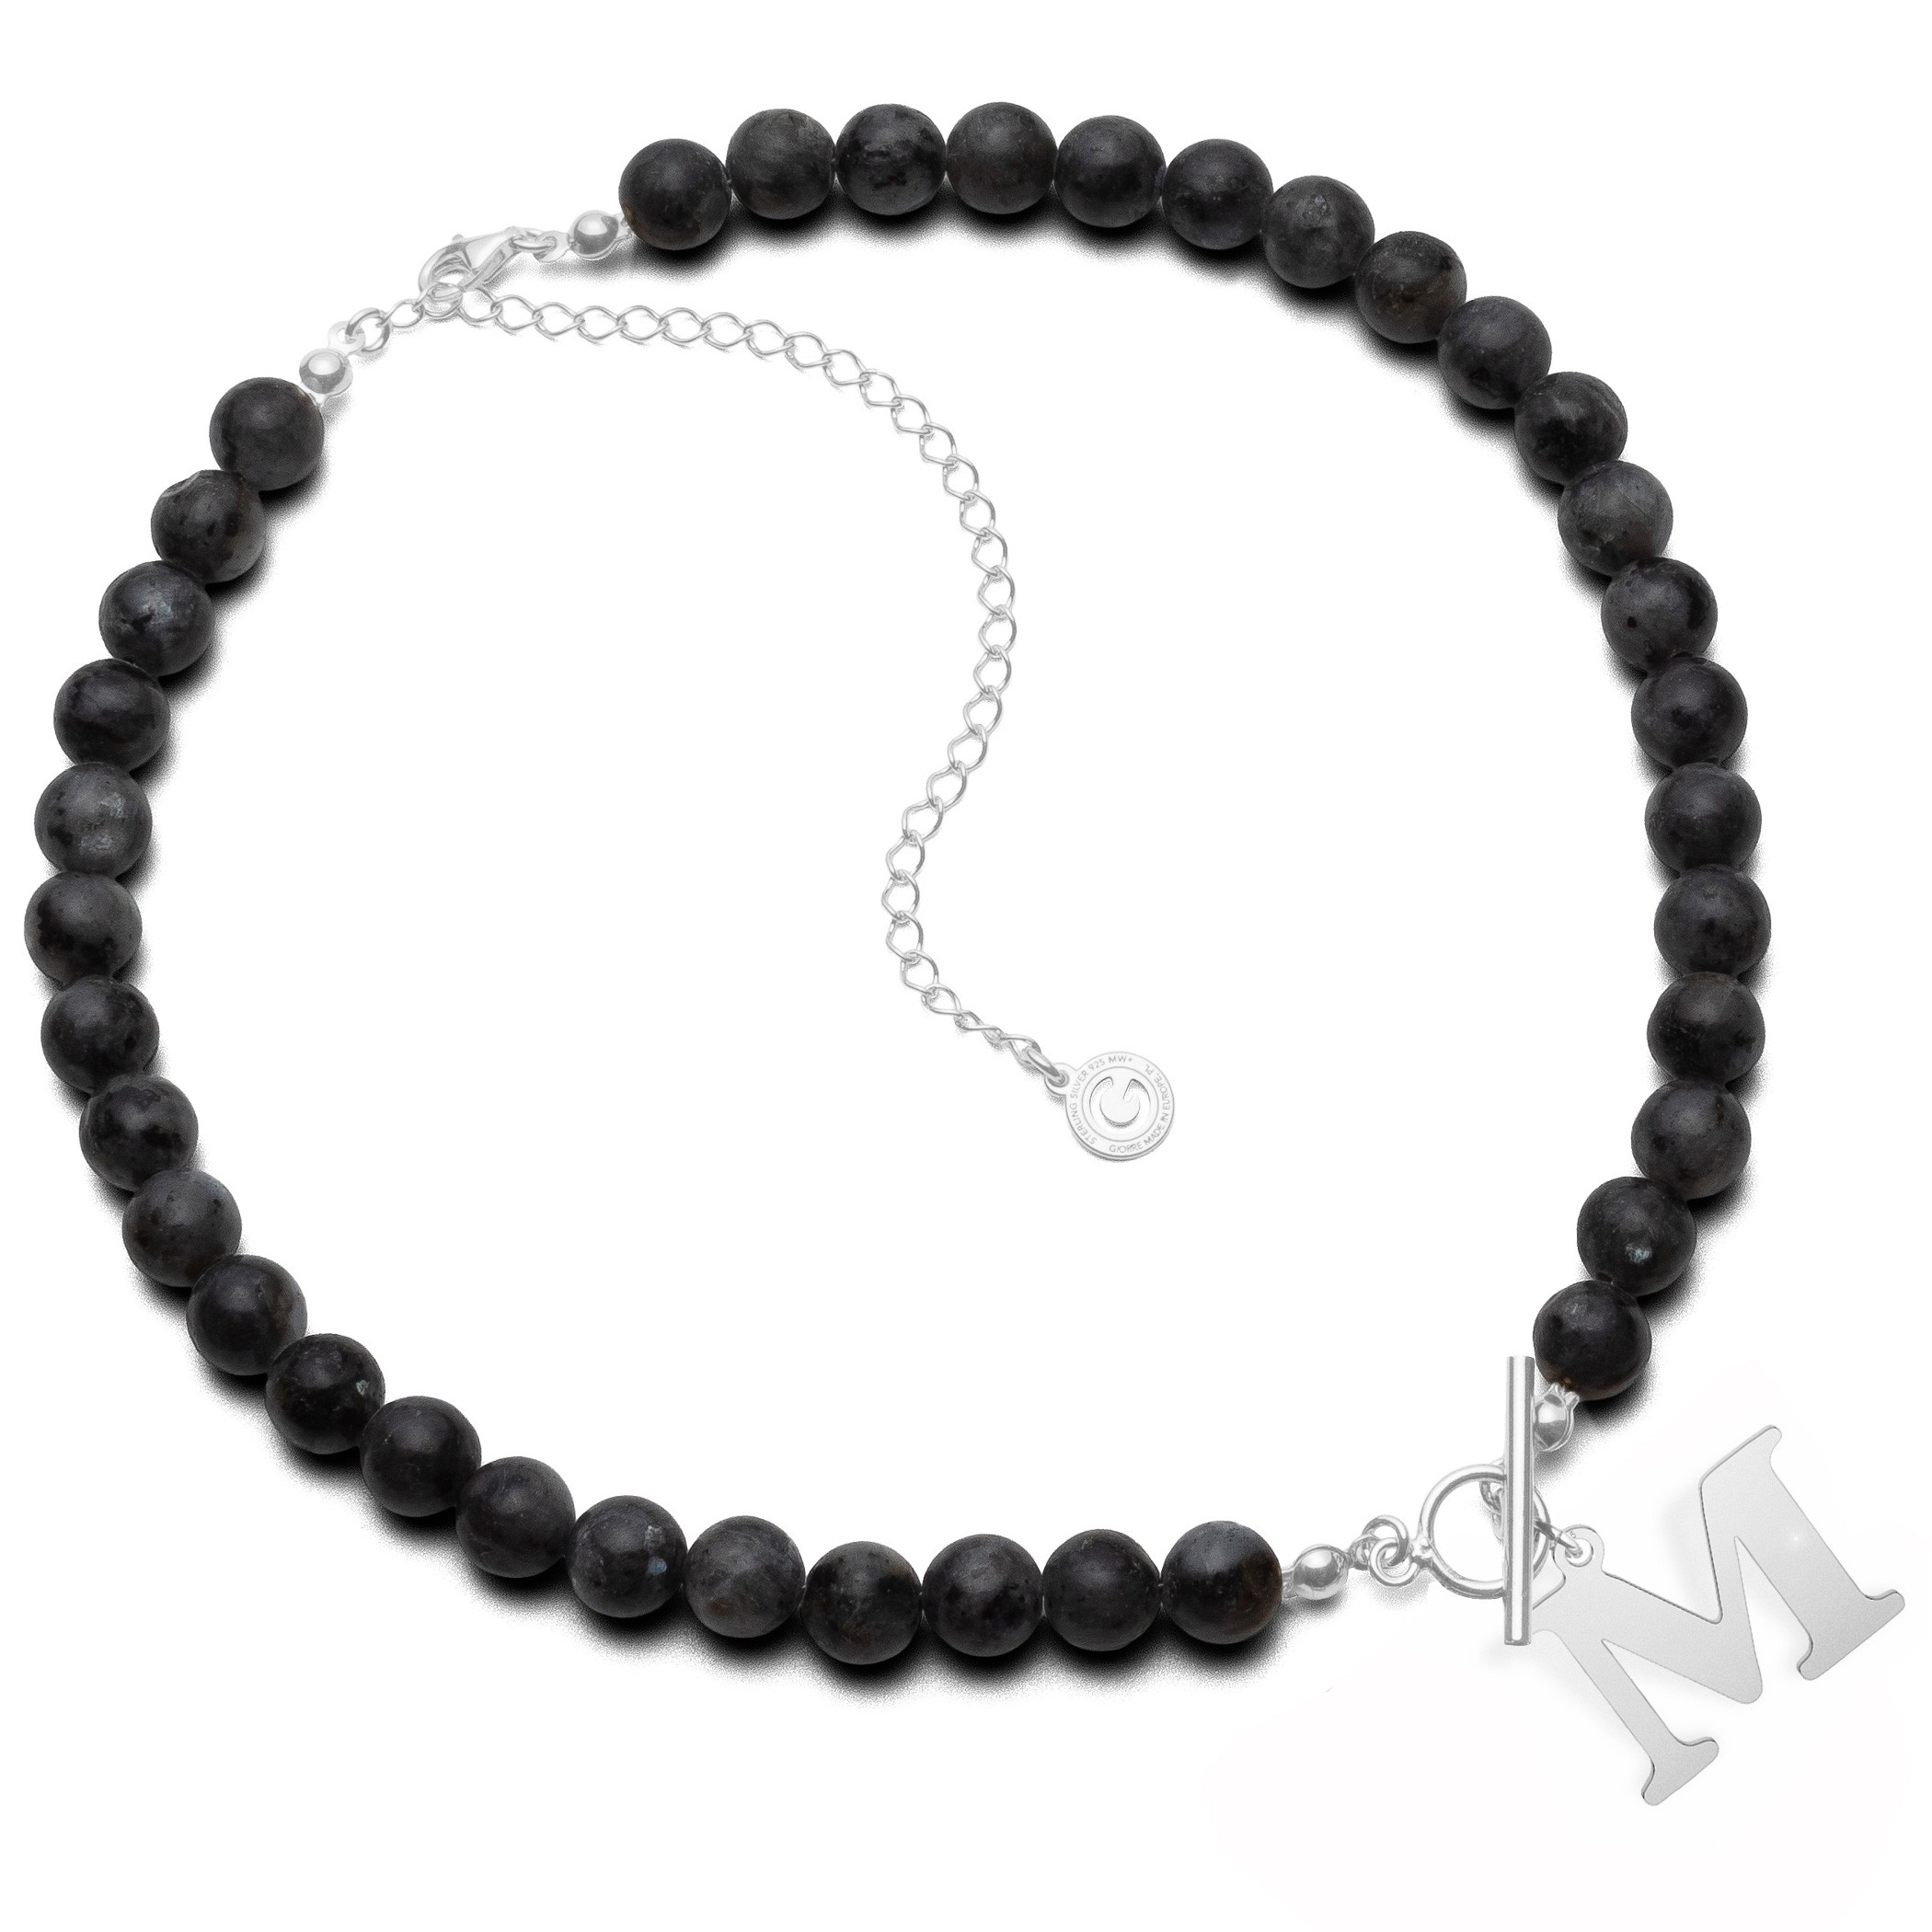 Black natural stones larvikit stones choker with letter, Silver 925